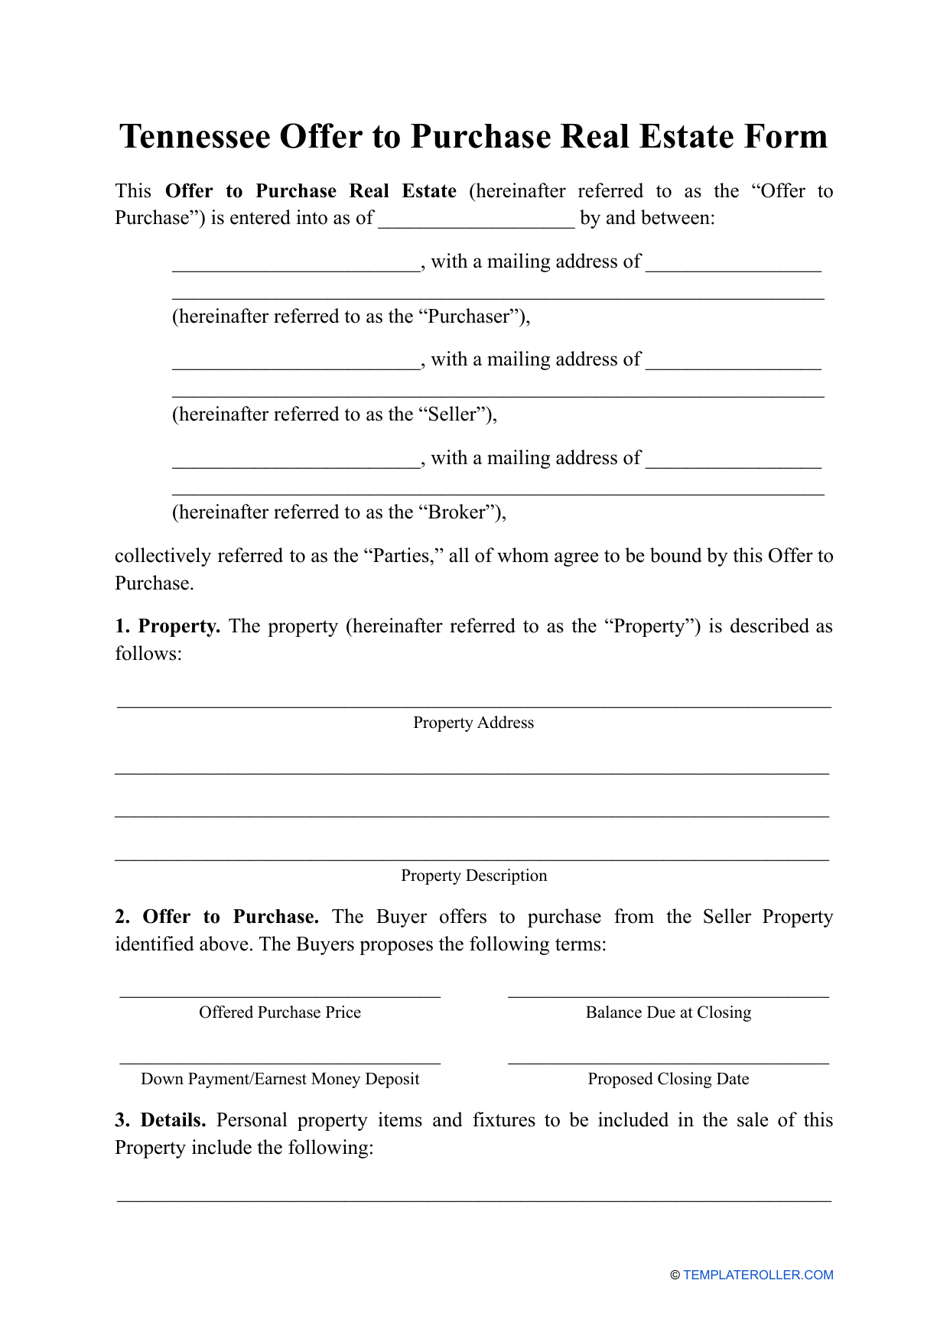 Offer to Purchase Real Estate Form - Tennessee, Page 1